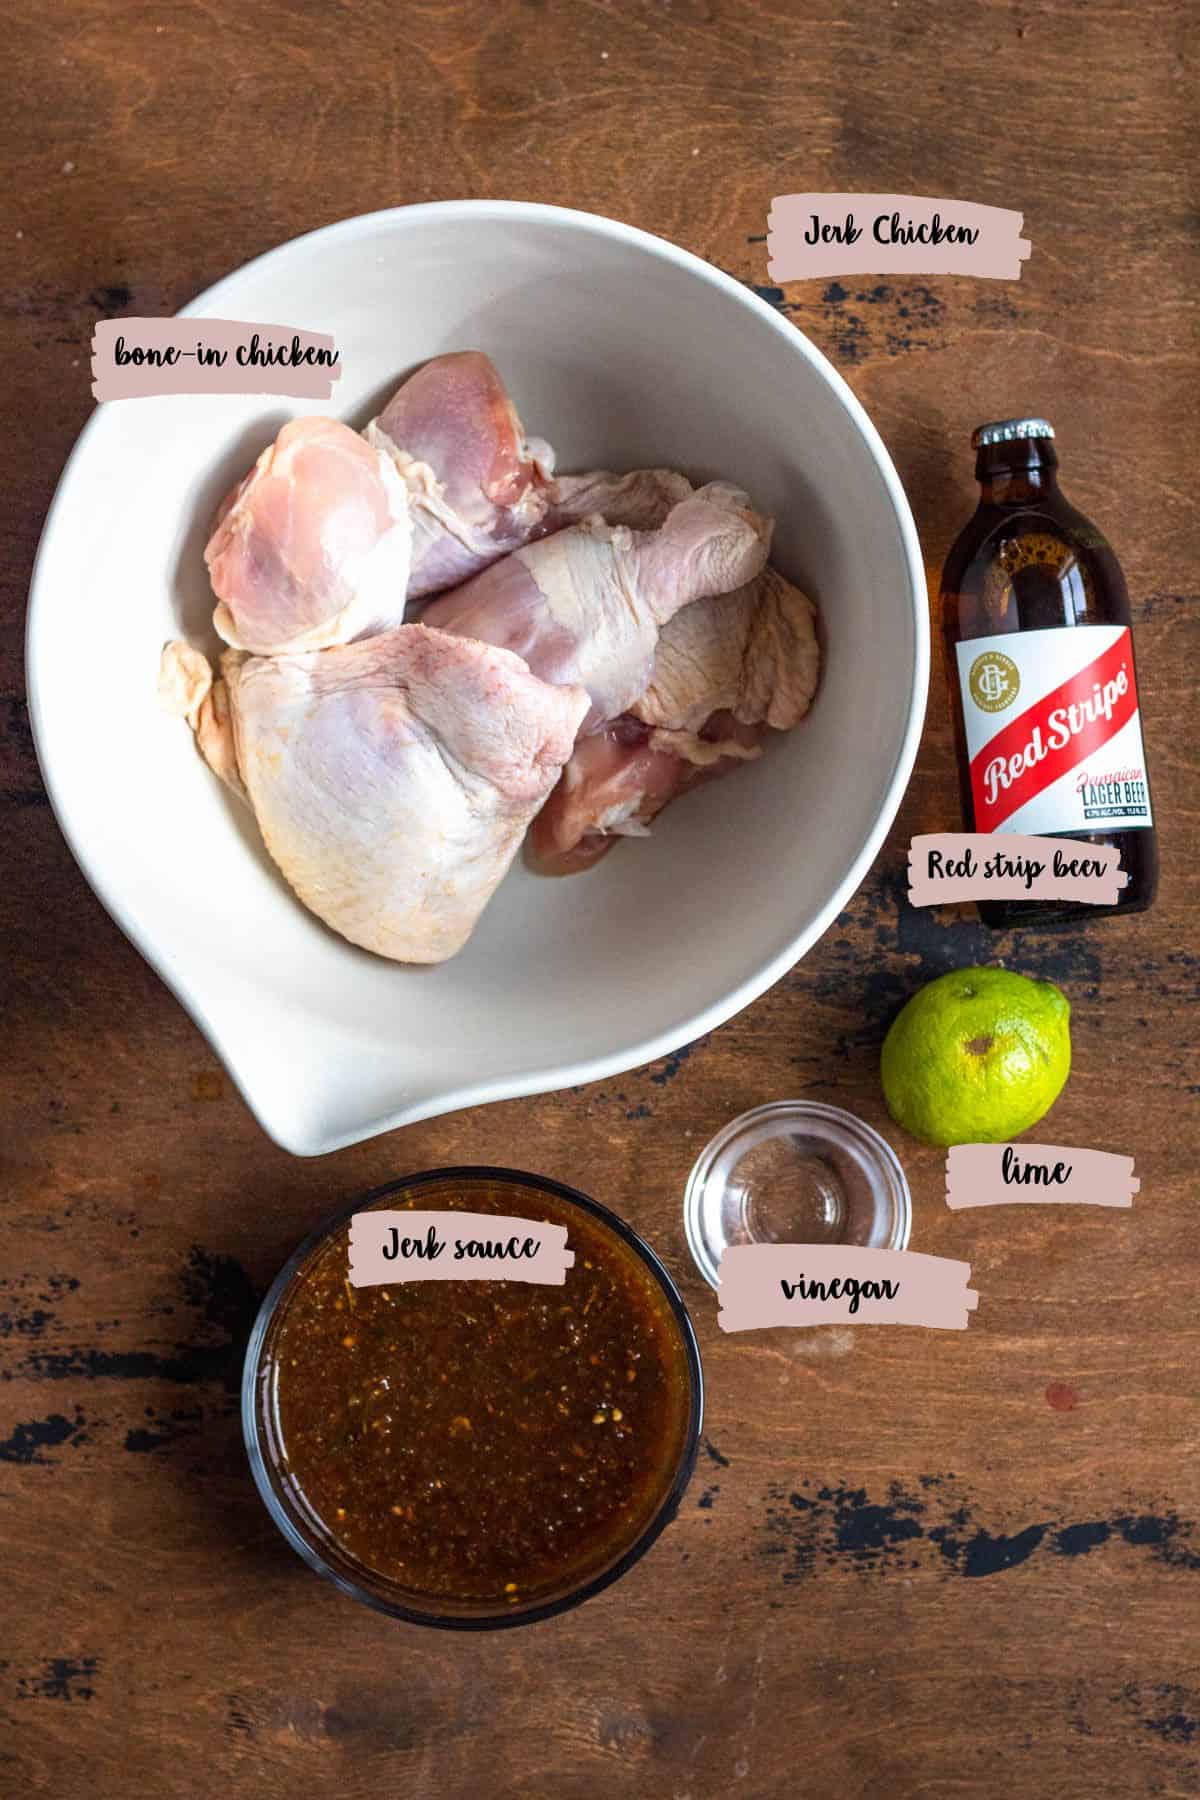 Ingredients shown are used to make the jerk chicken. 